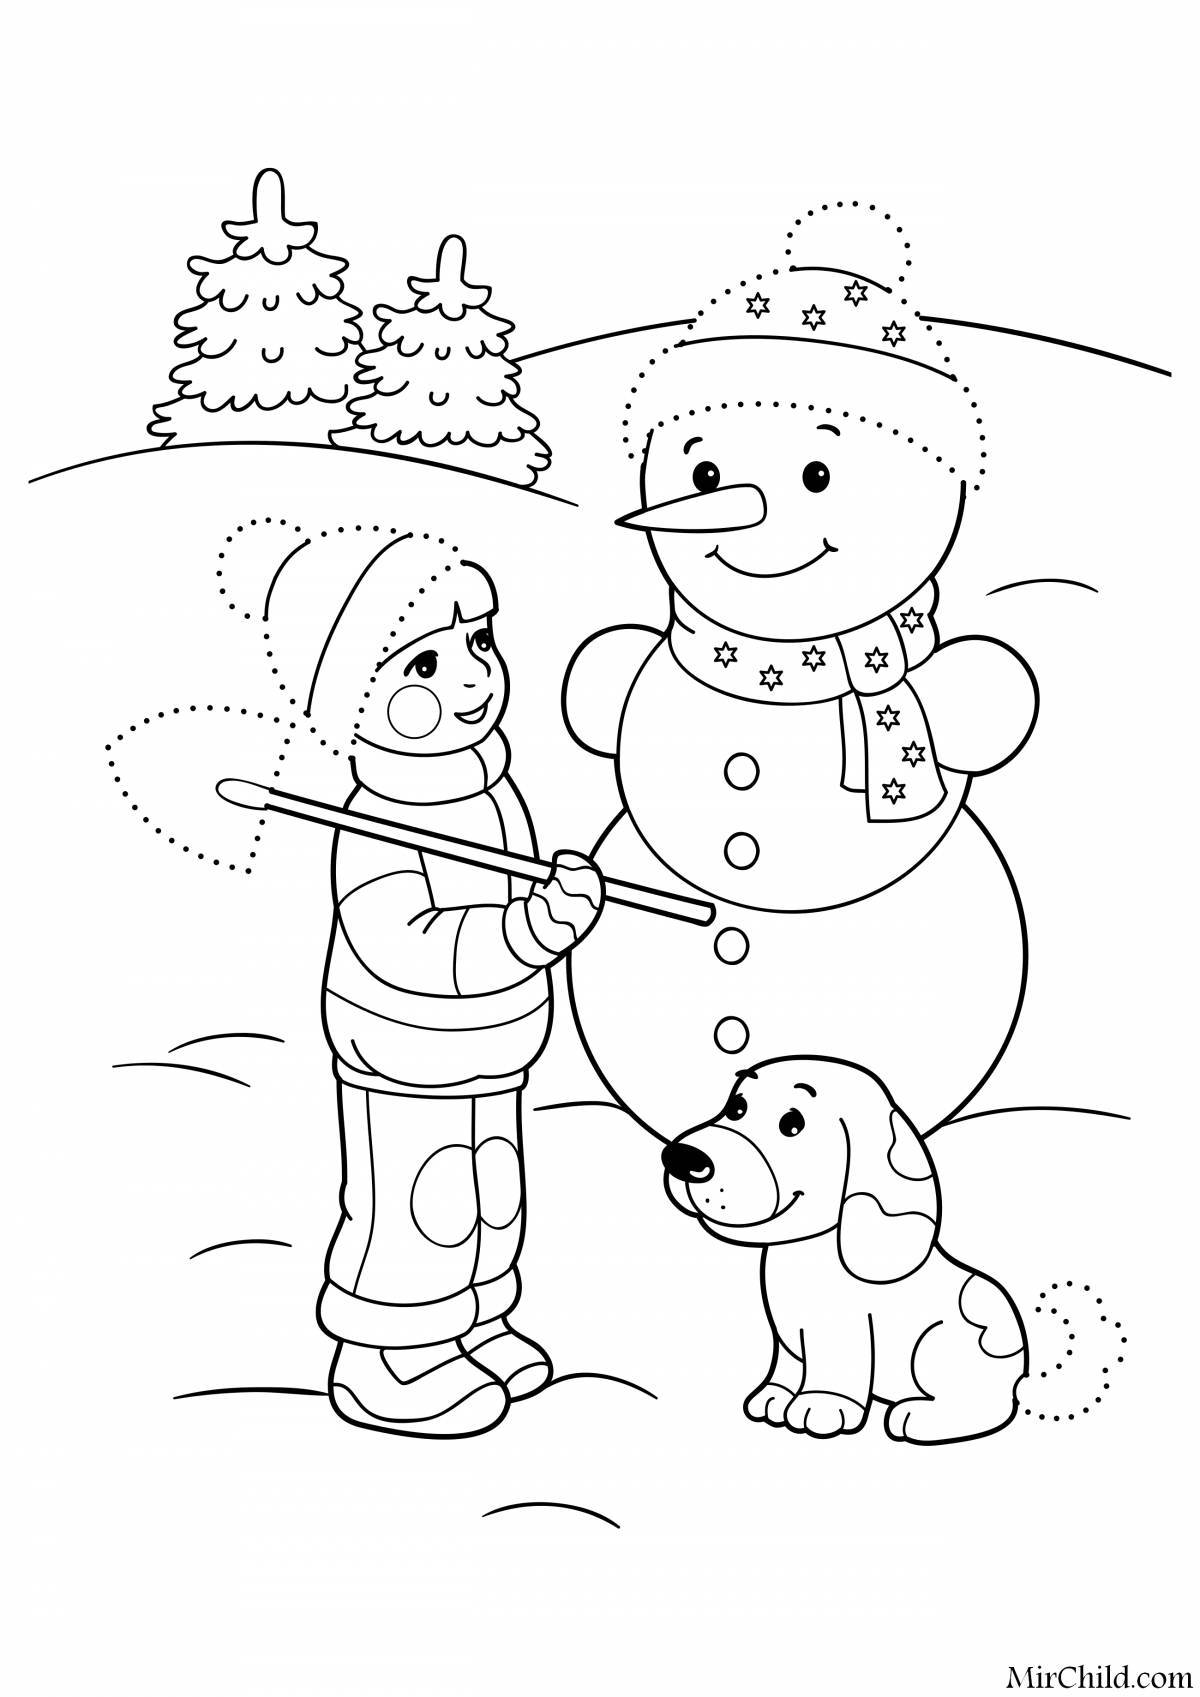 Peaceful winter coloring for children 6-7 years old